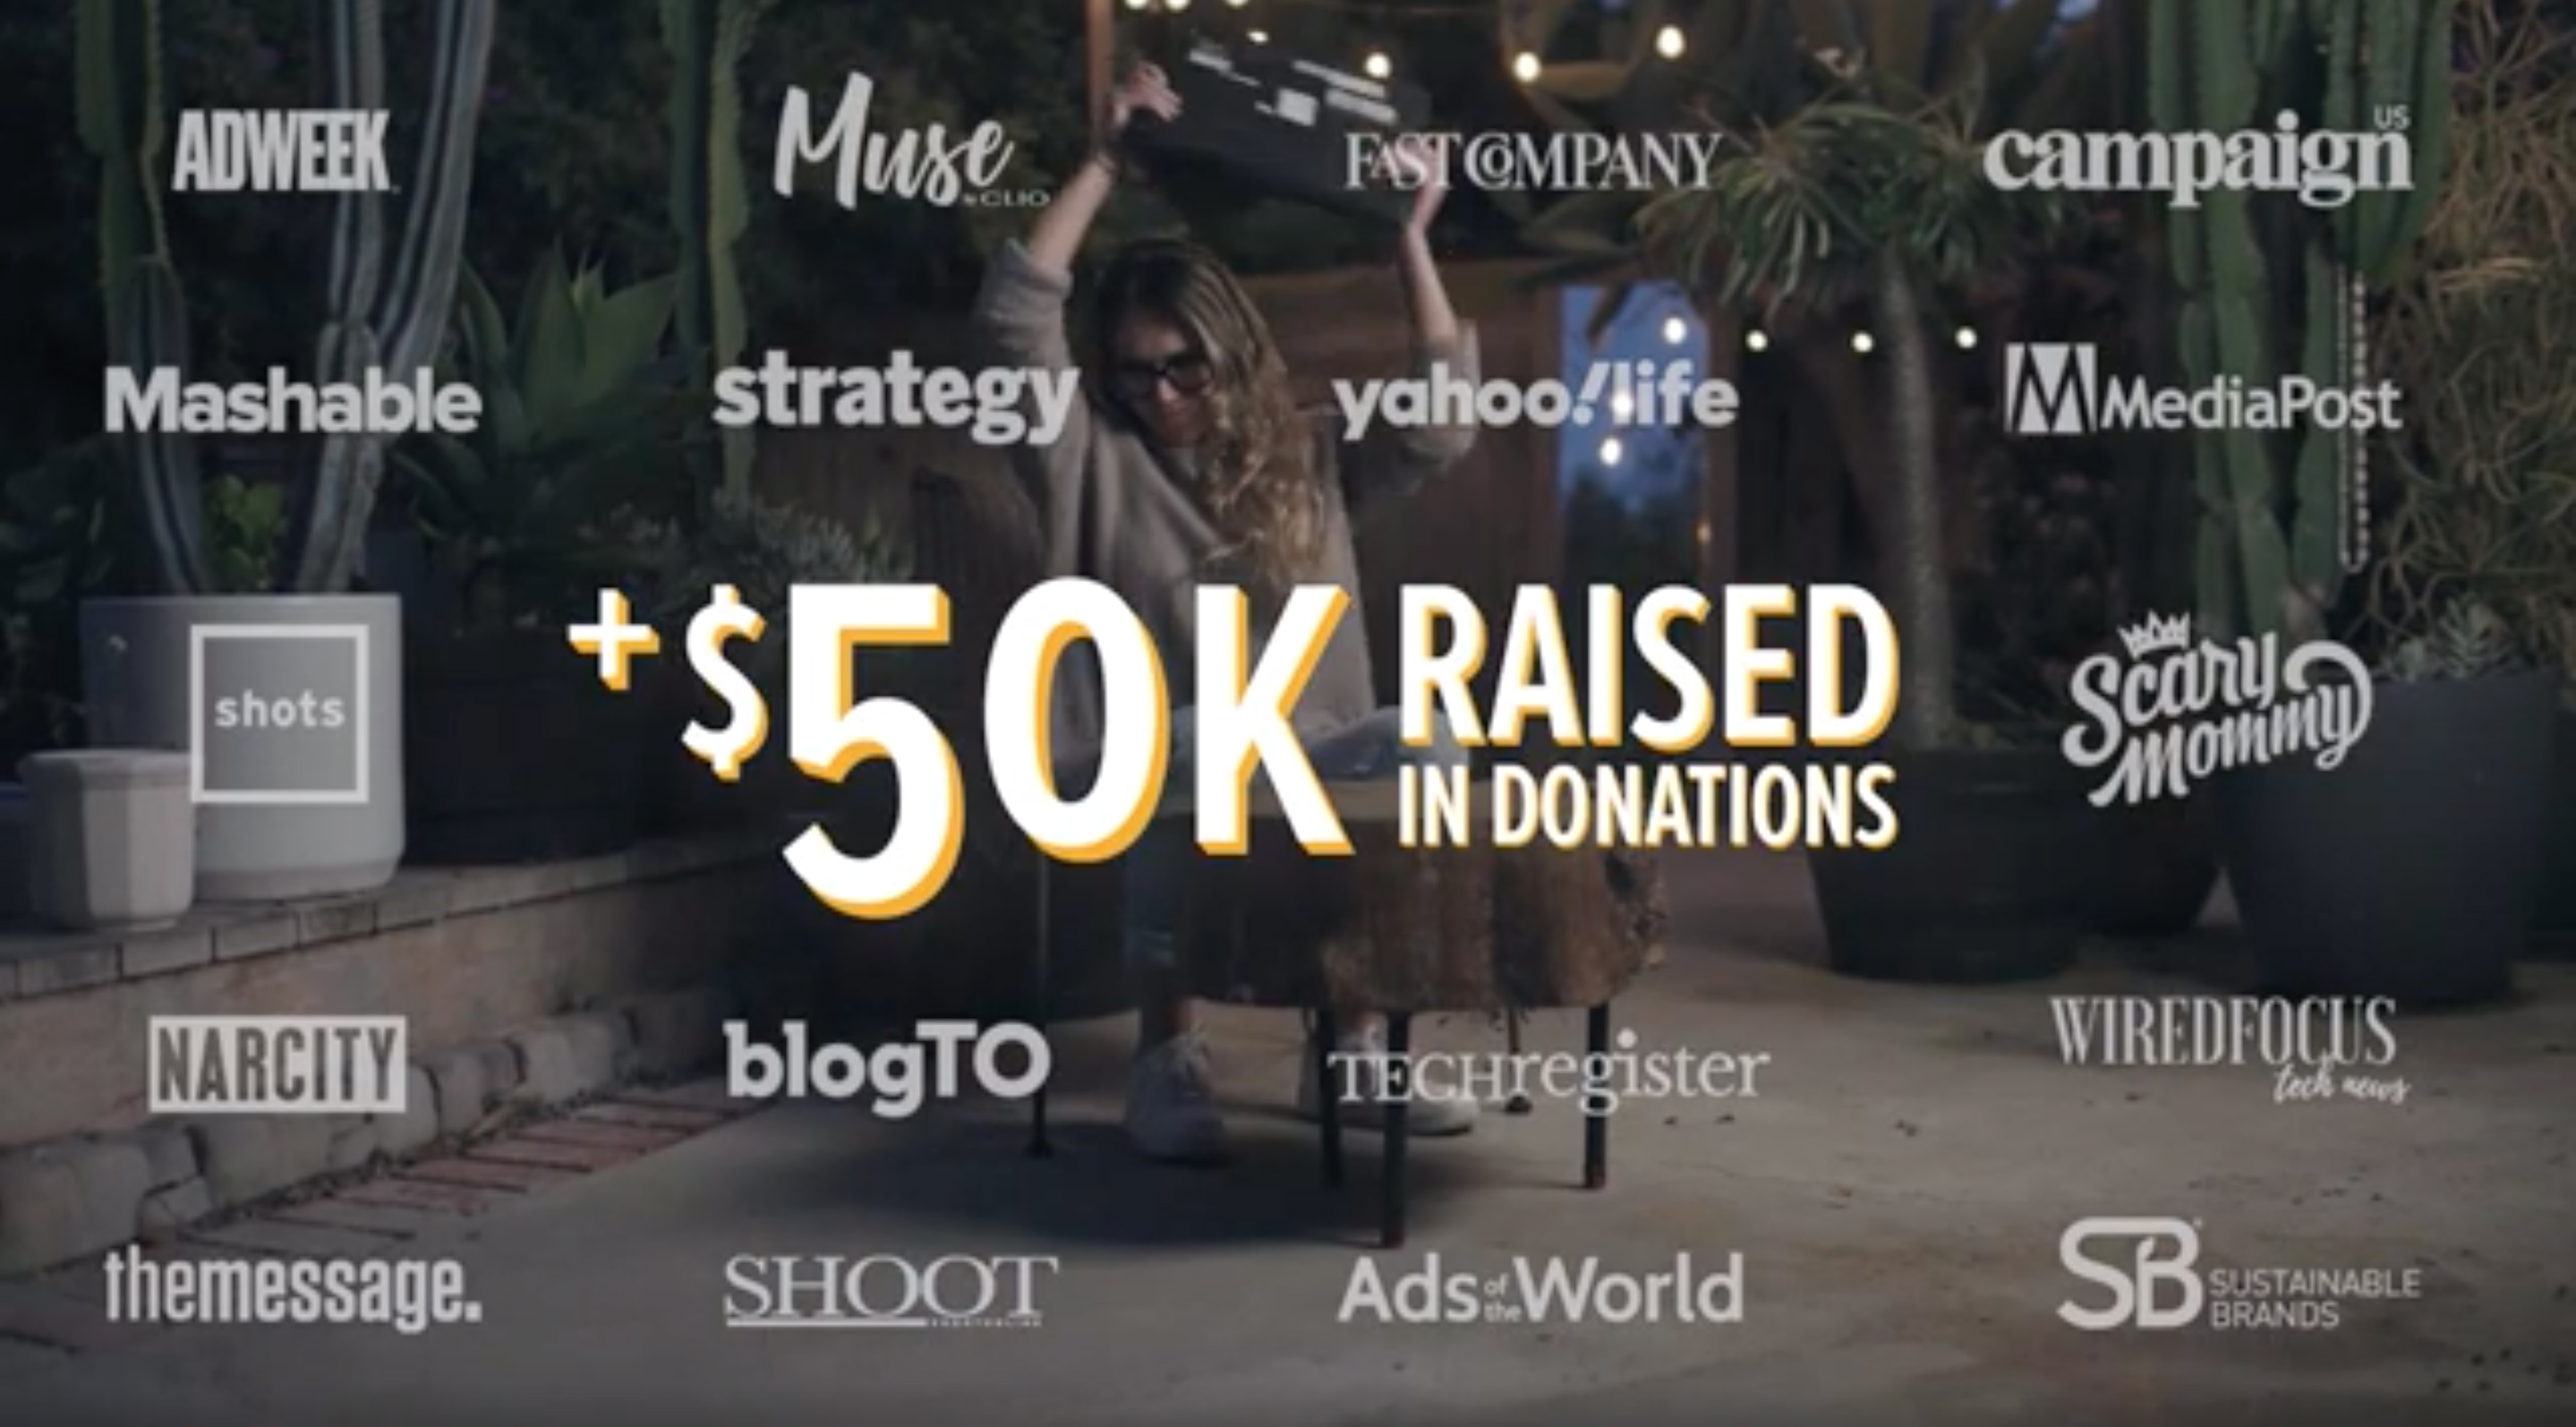 Logos of publications where campaign was featured along with impact $50k money raised in donations